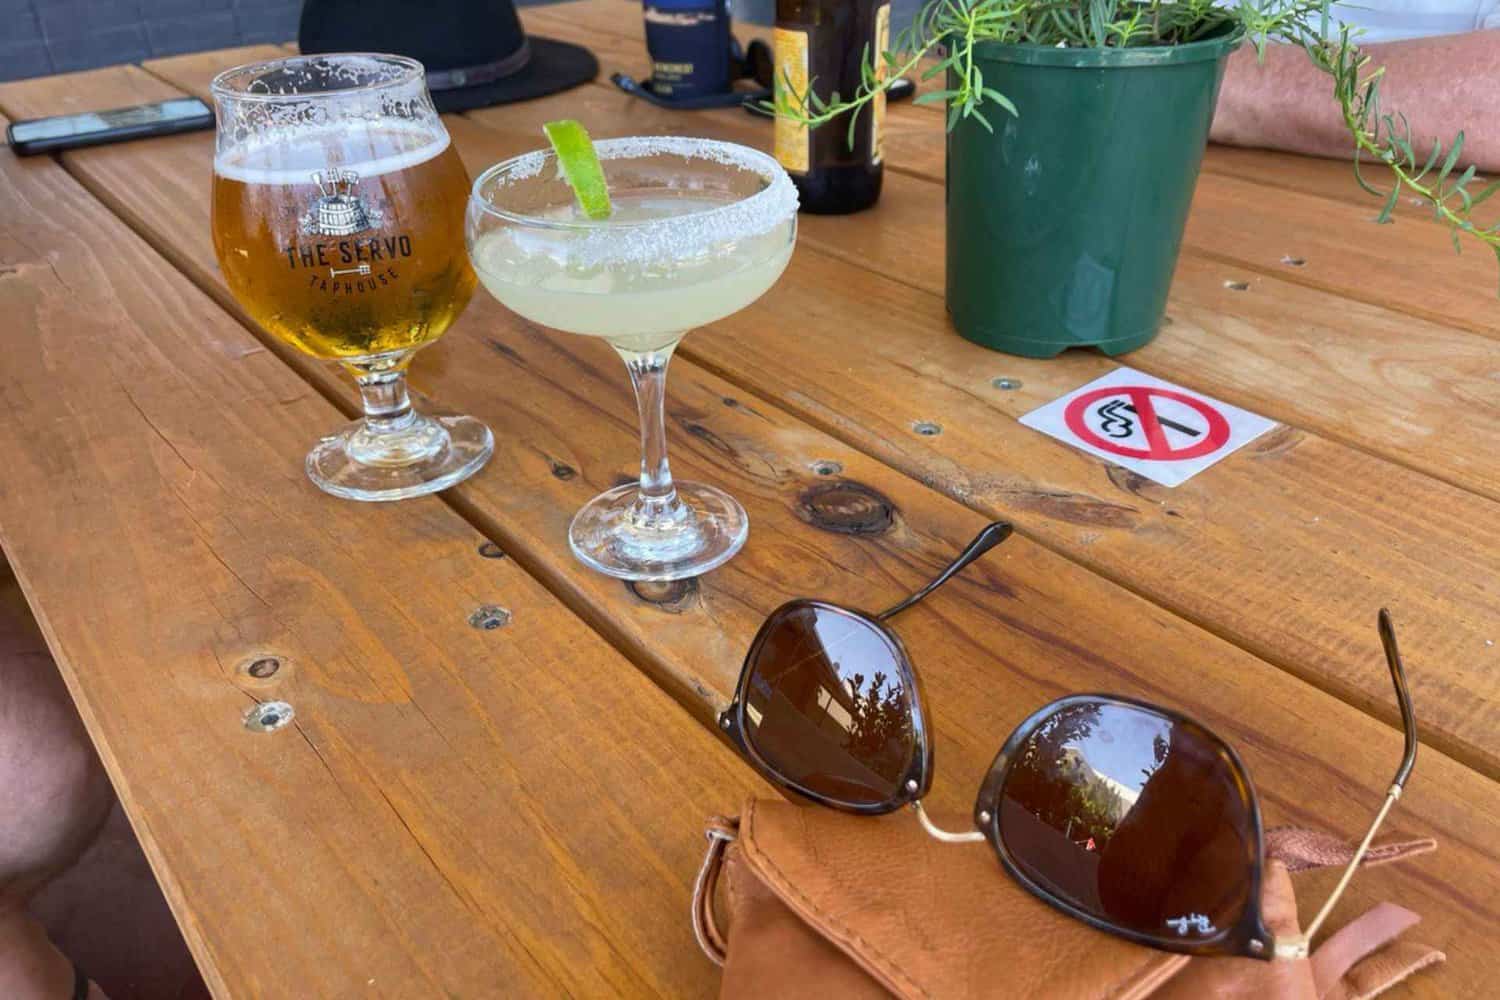 A photo of a pint of beer and a handcrafted cocktail on a wooden table at a local Margaret River brewery. The beer has a thick creamy head, and the cocktail is garnished with fruit and herbs. The rustic wooden table with small plant as the centrepiece evoke a warm and cozy atmosphere, inviting you to sit and enjoy a drink with friends.